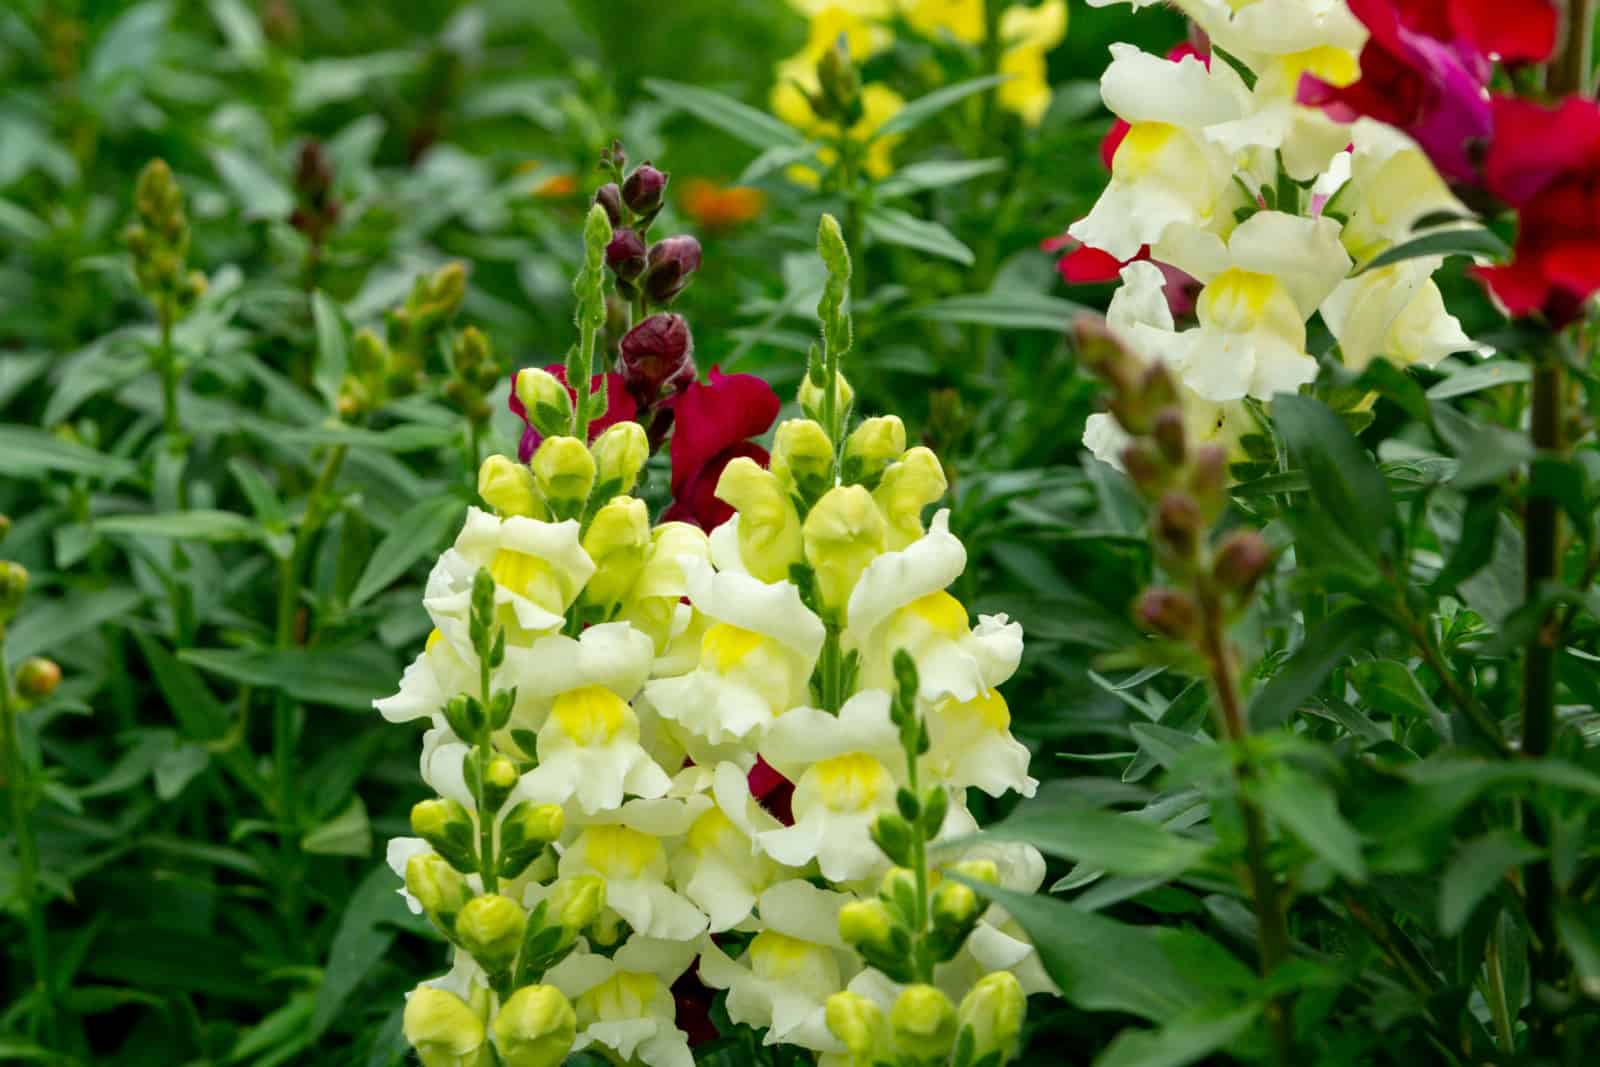 Scarlet and pale yellow snapdragon flowers in the summer garden